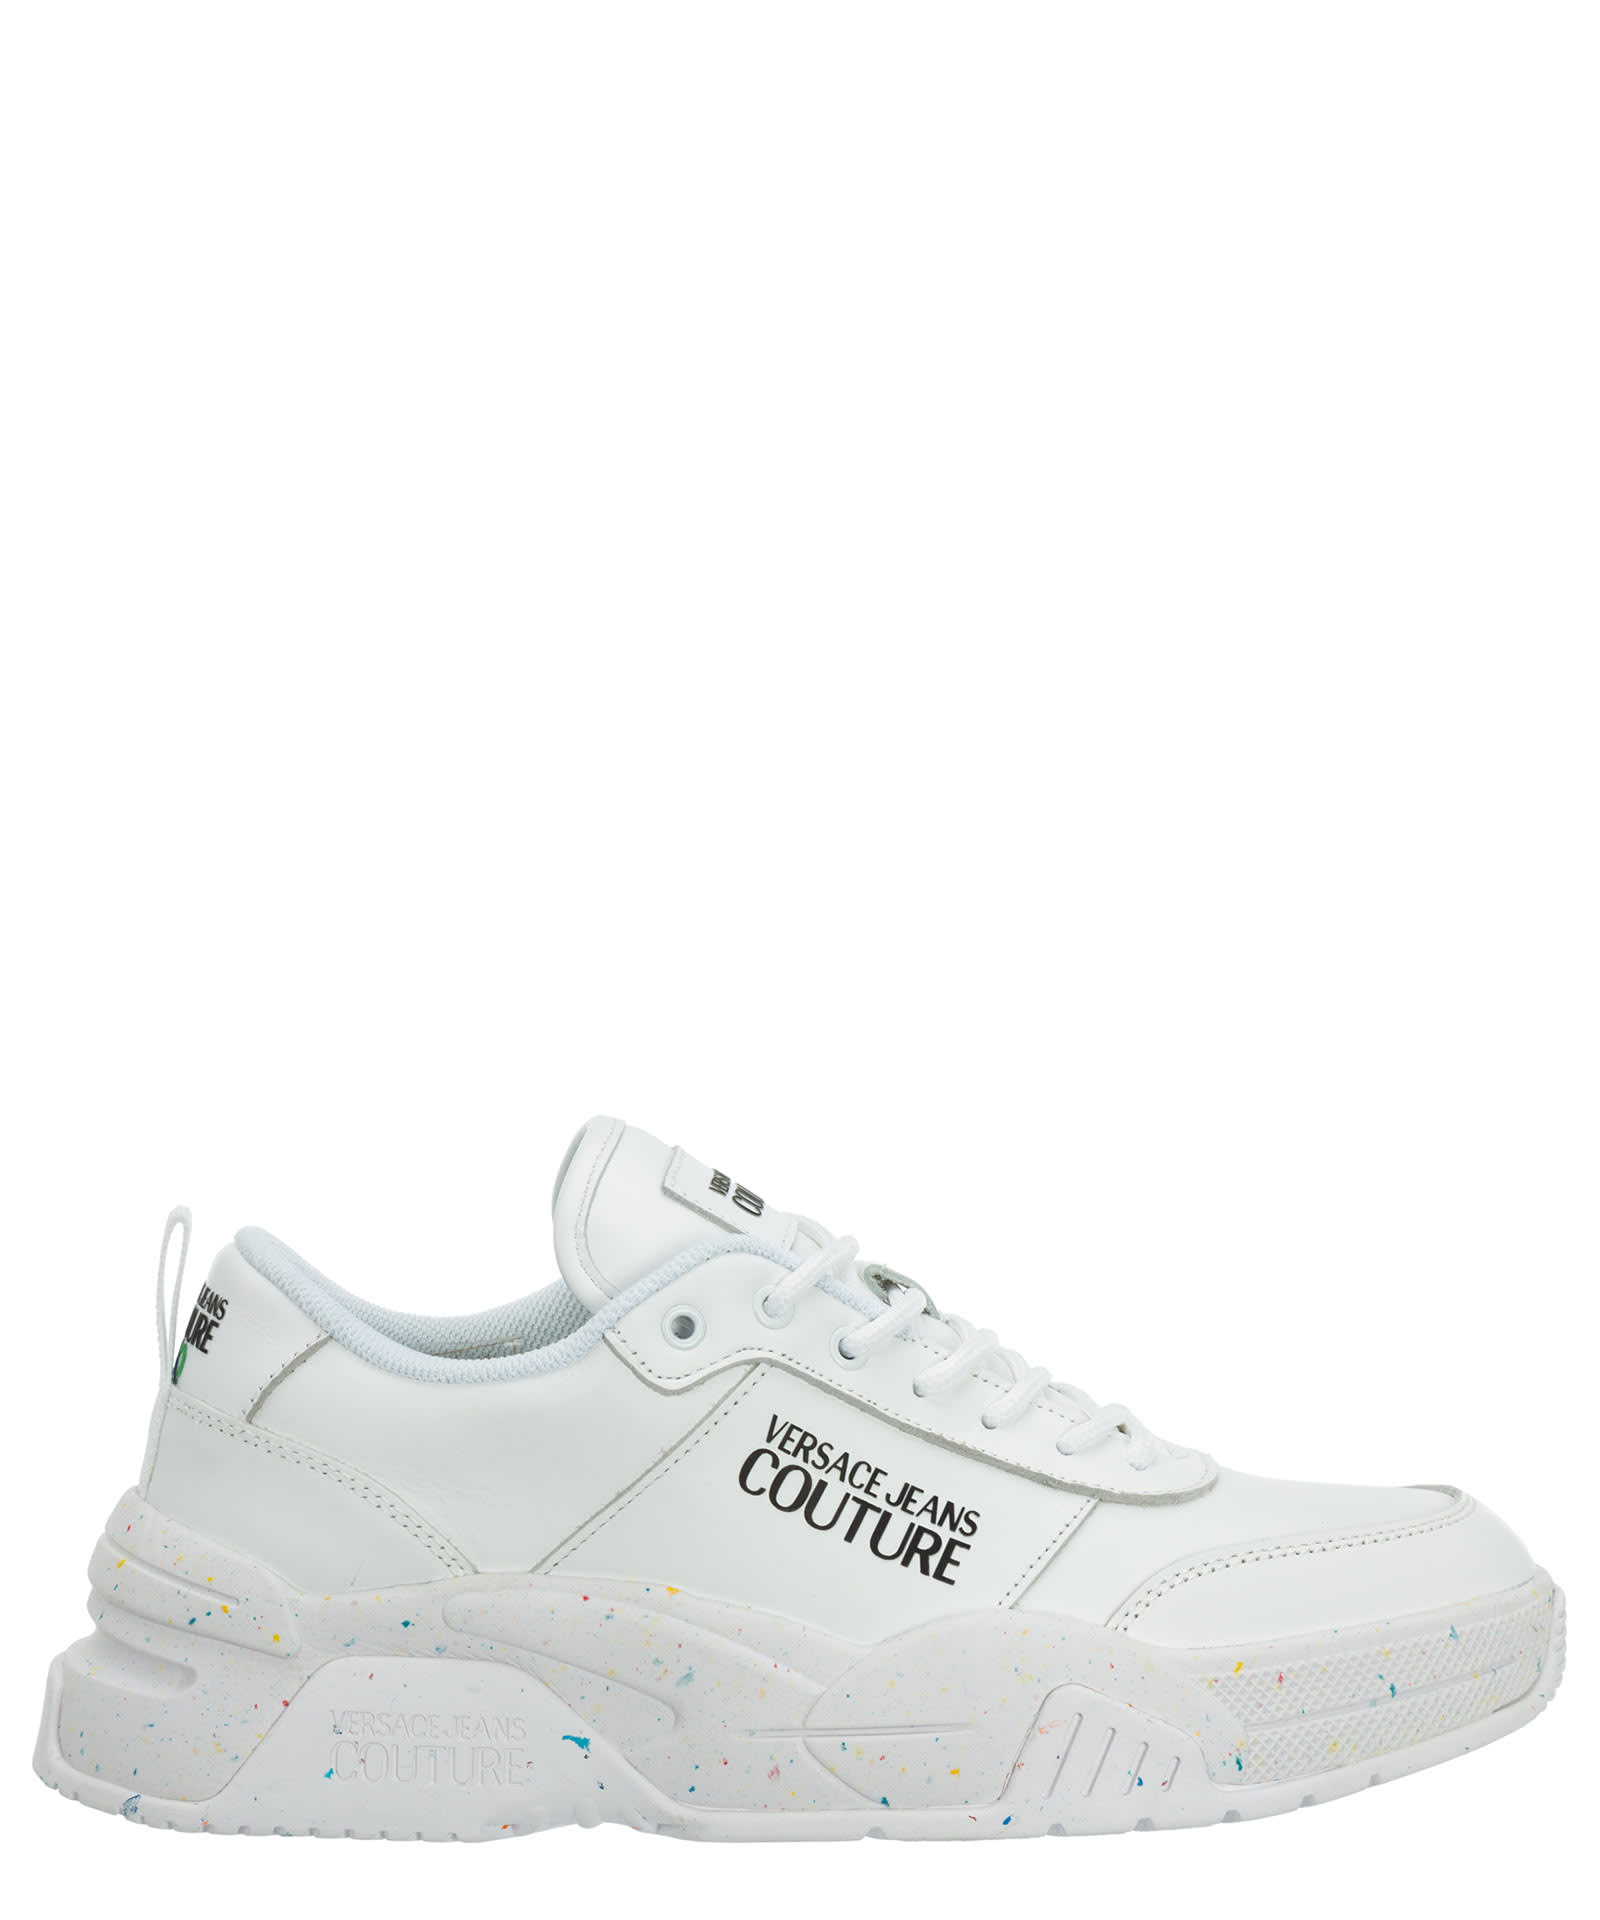 Versace Jeans Couture Stargaze Leather Sneakers